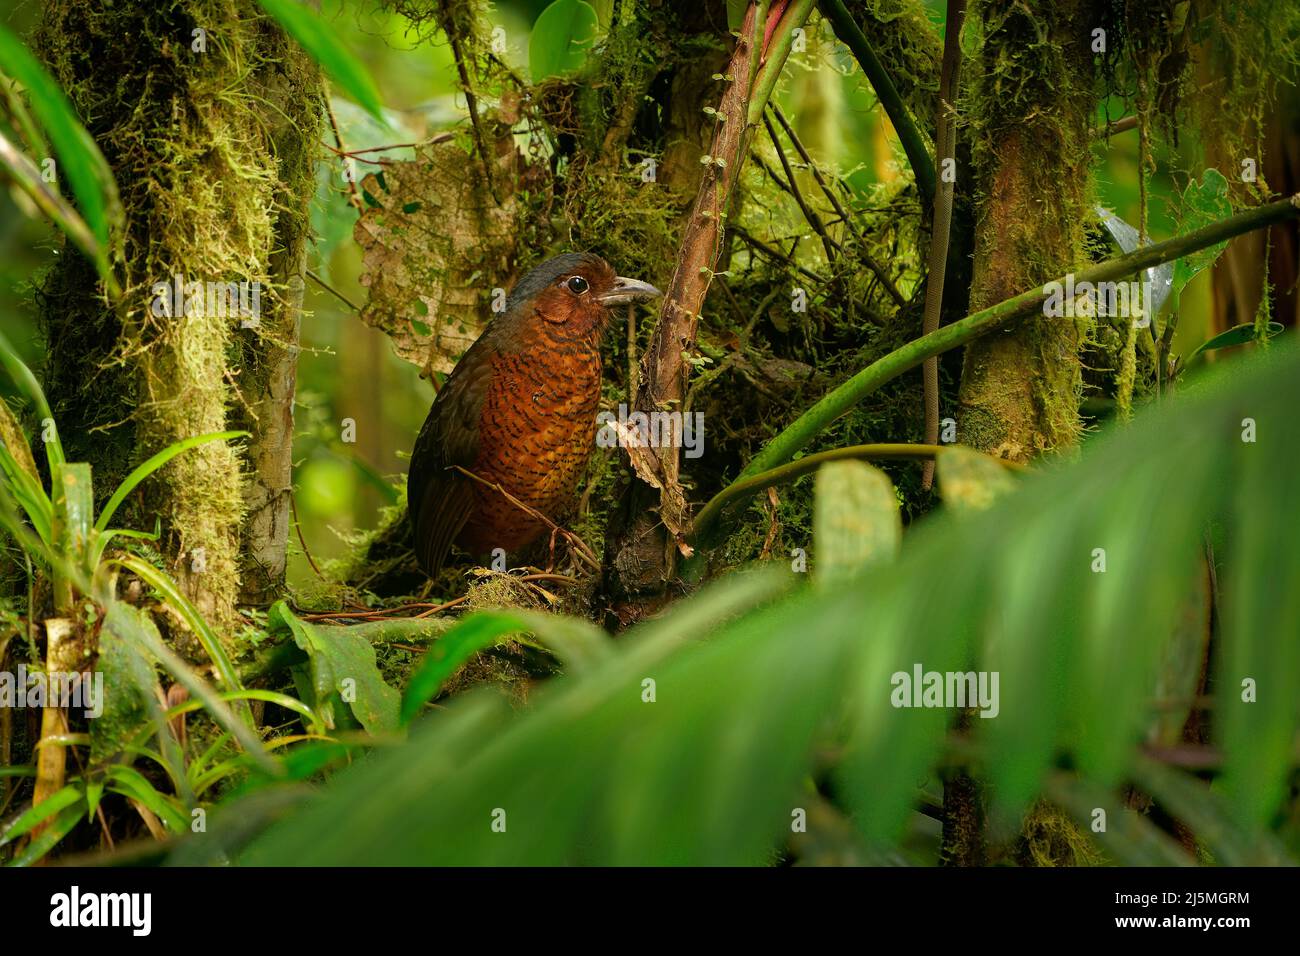 Giant Antpitta - Grallaria gigantea perching bird species in antpitta family Grallariidae, rare and enigmatic, known only from Colombia and Ecuador, c Stock Photo